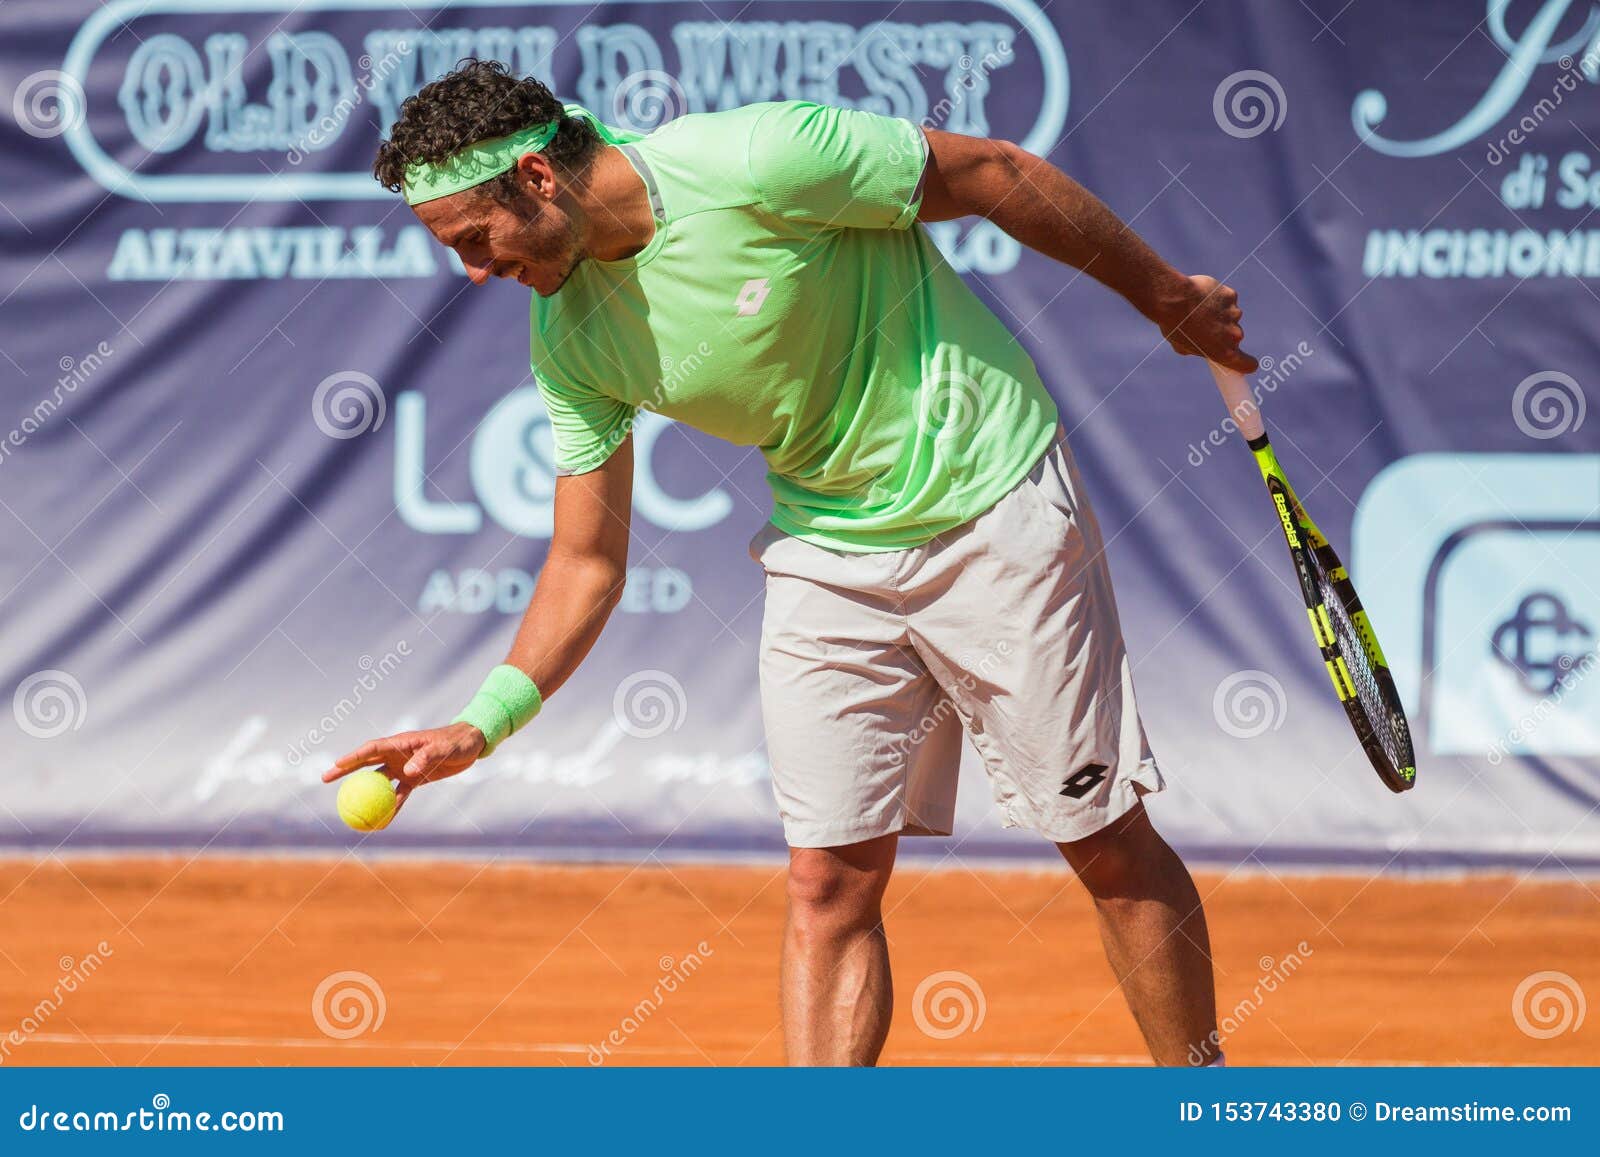 Alessandro Giannessi Atp Tennis Player Editorial Image